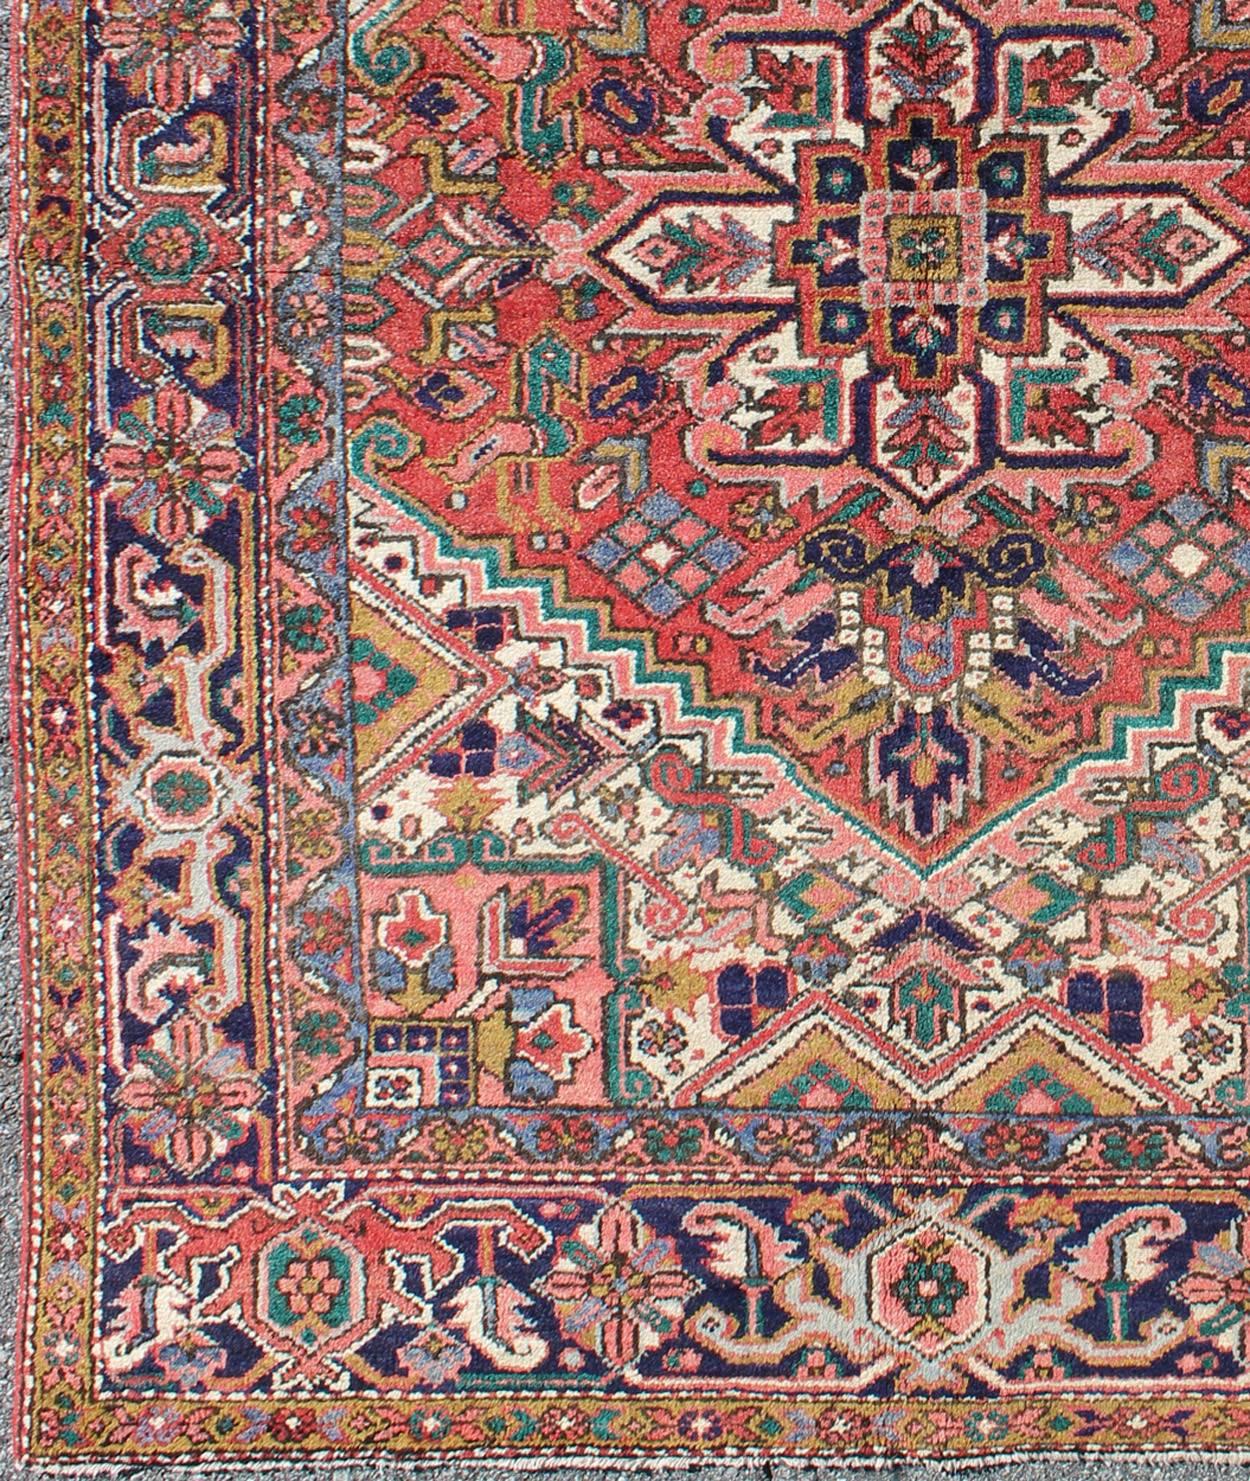 This vintage Persian Heriz rug features a jewel-toned geometric design and center medallion. 
Measures: 4.10 x 6.6.